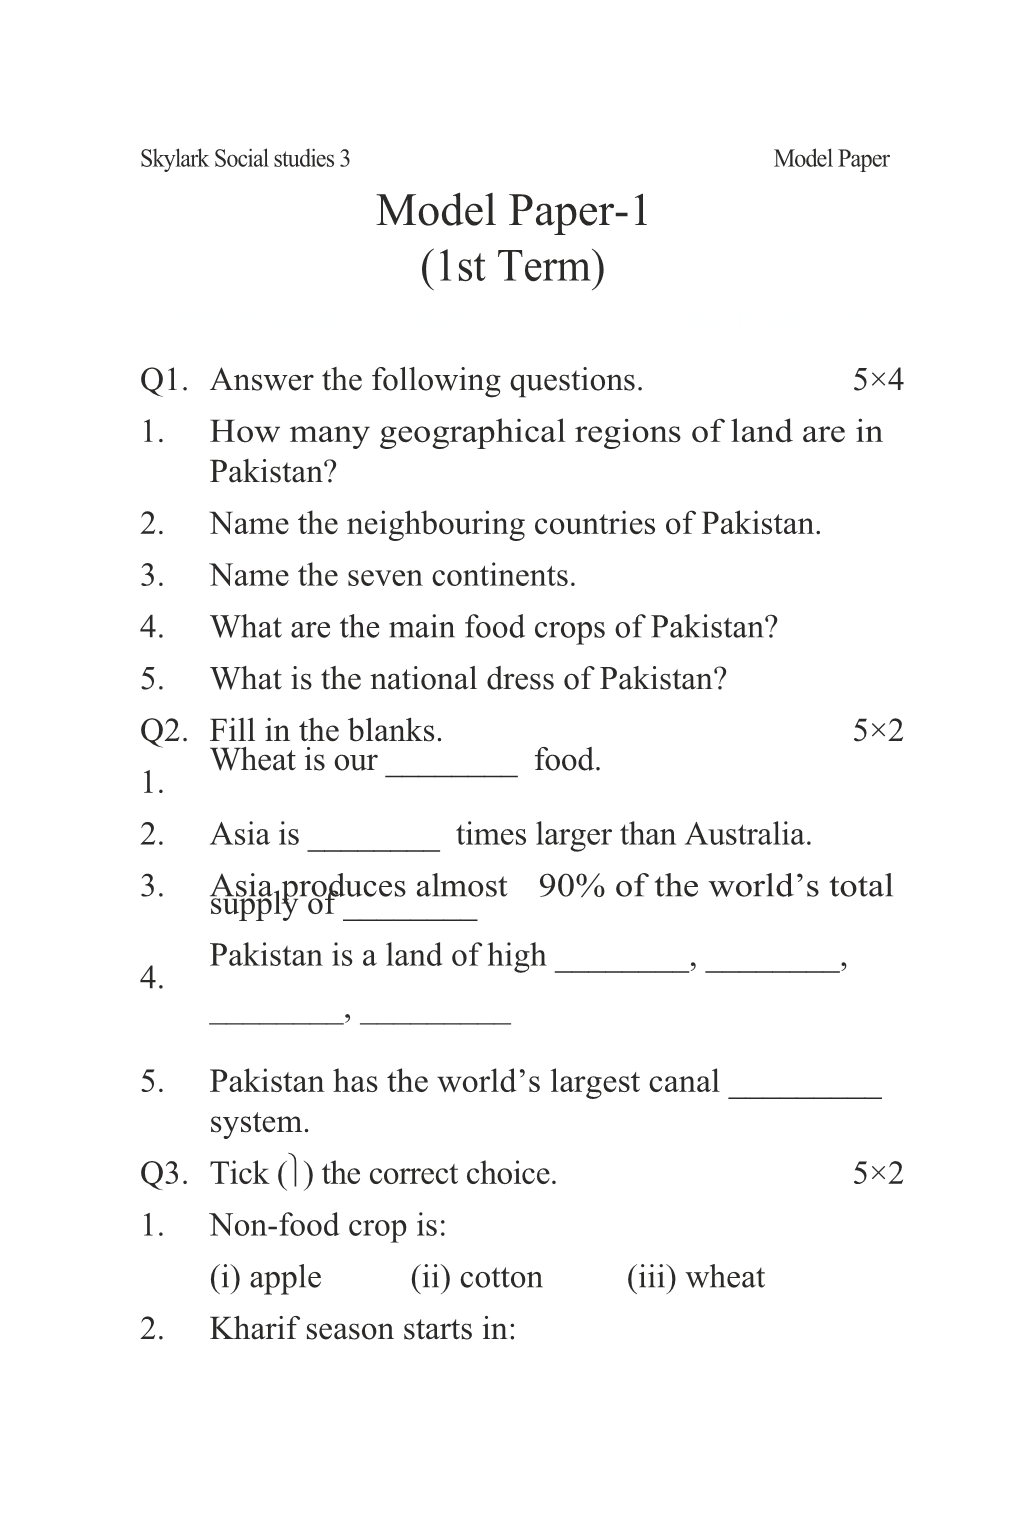 Q1.Answer the Following Questions.5 4